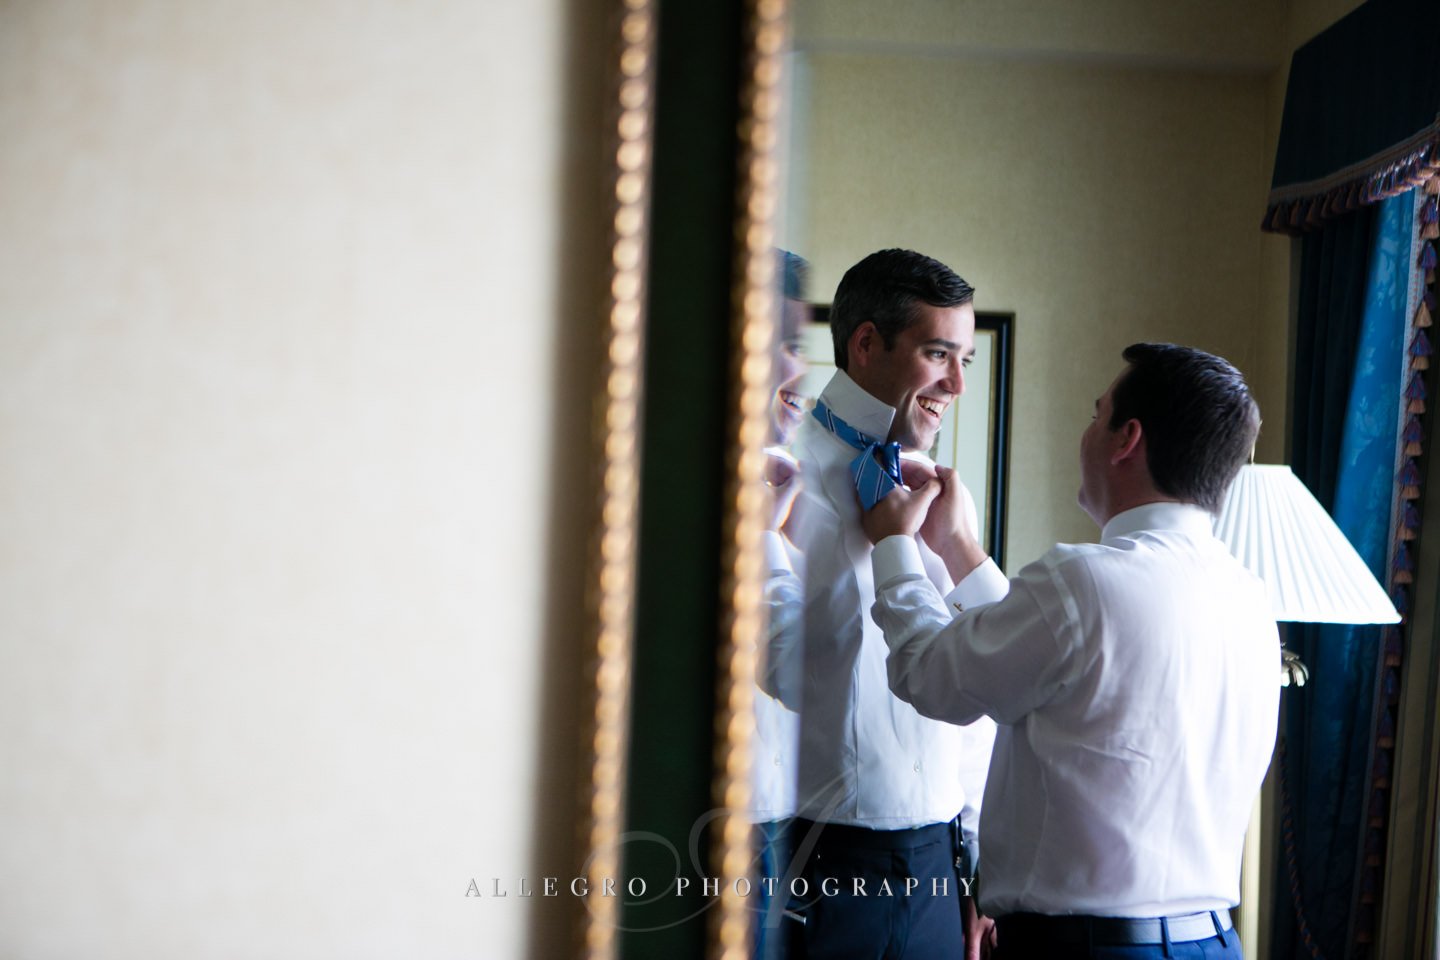 groom with bow tie - tieing it